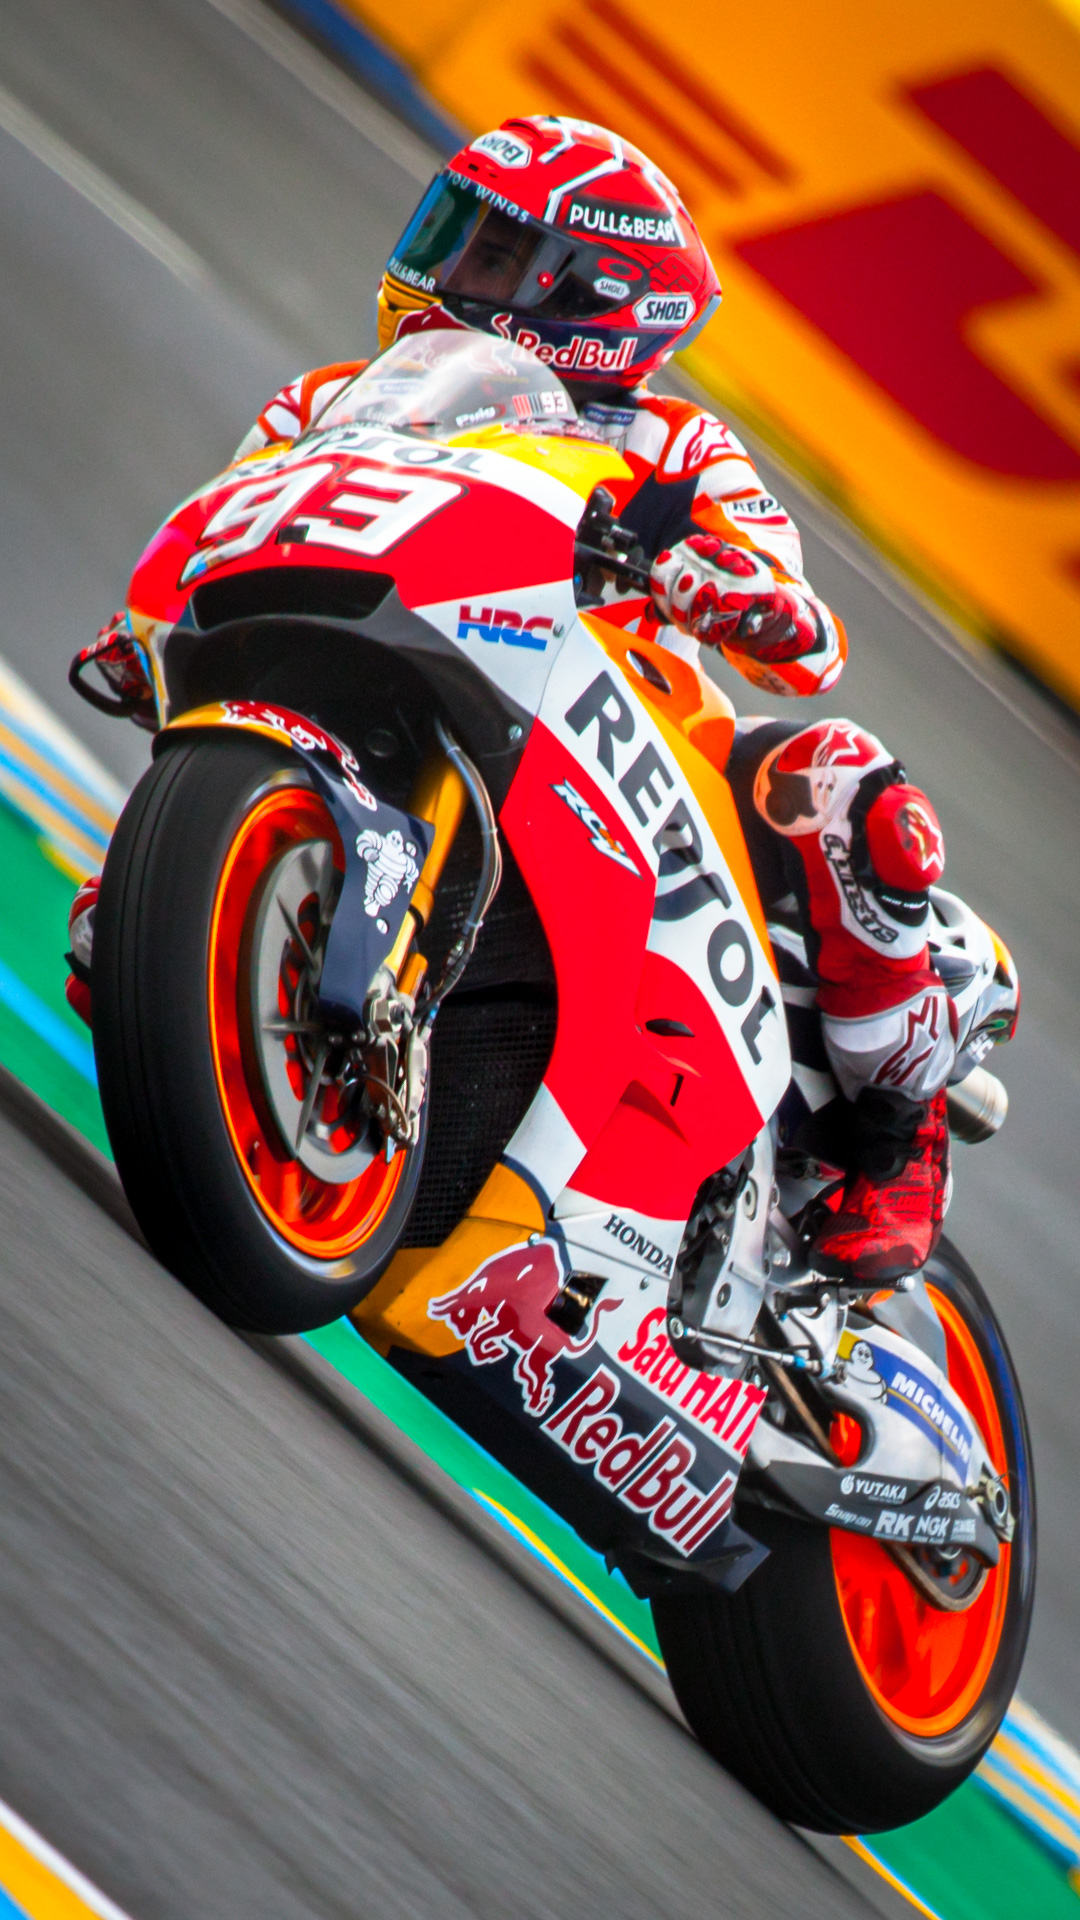 free wallpaper for android phone of MotoGP motorcycle rider in Full HD resolution